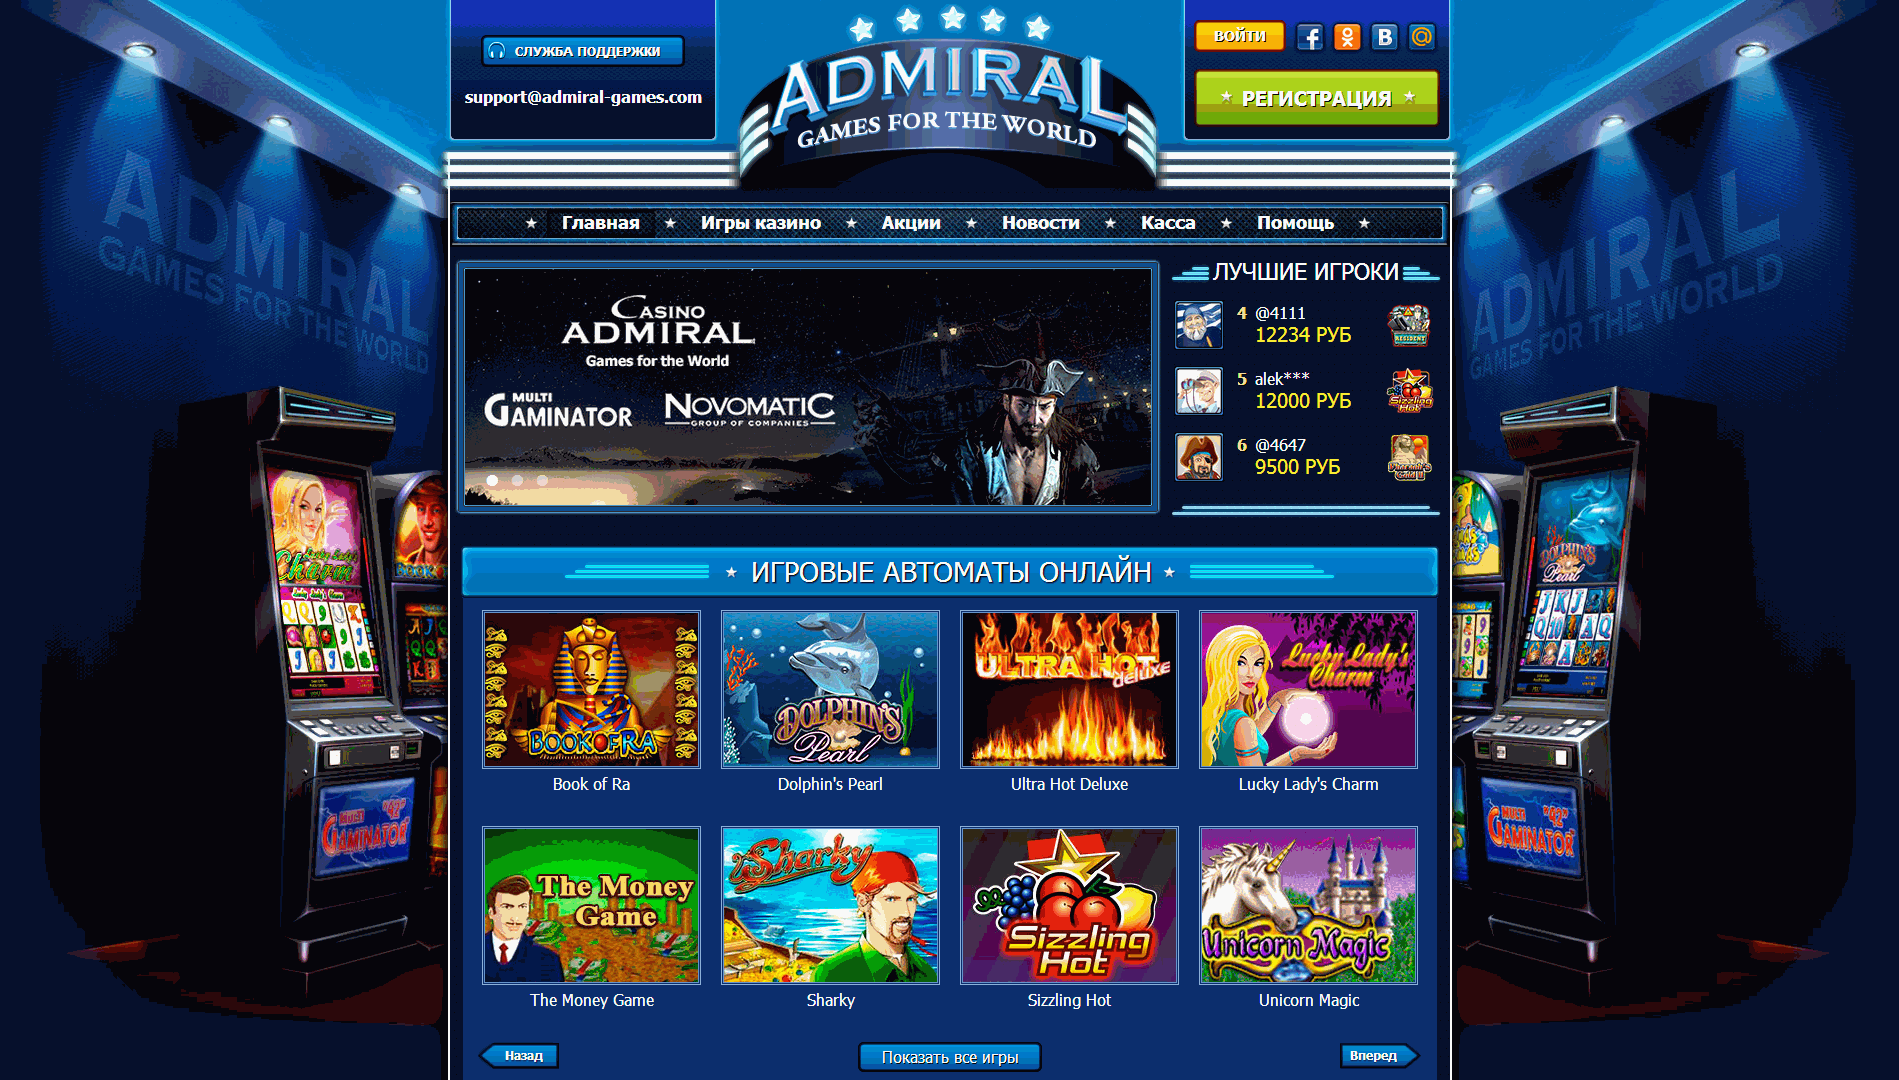 Online casino games play for real money